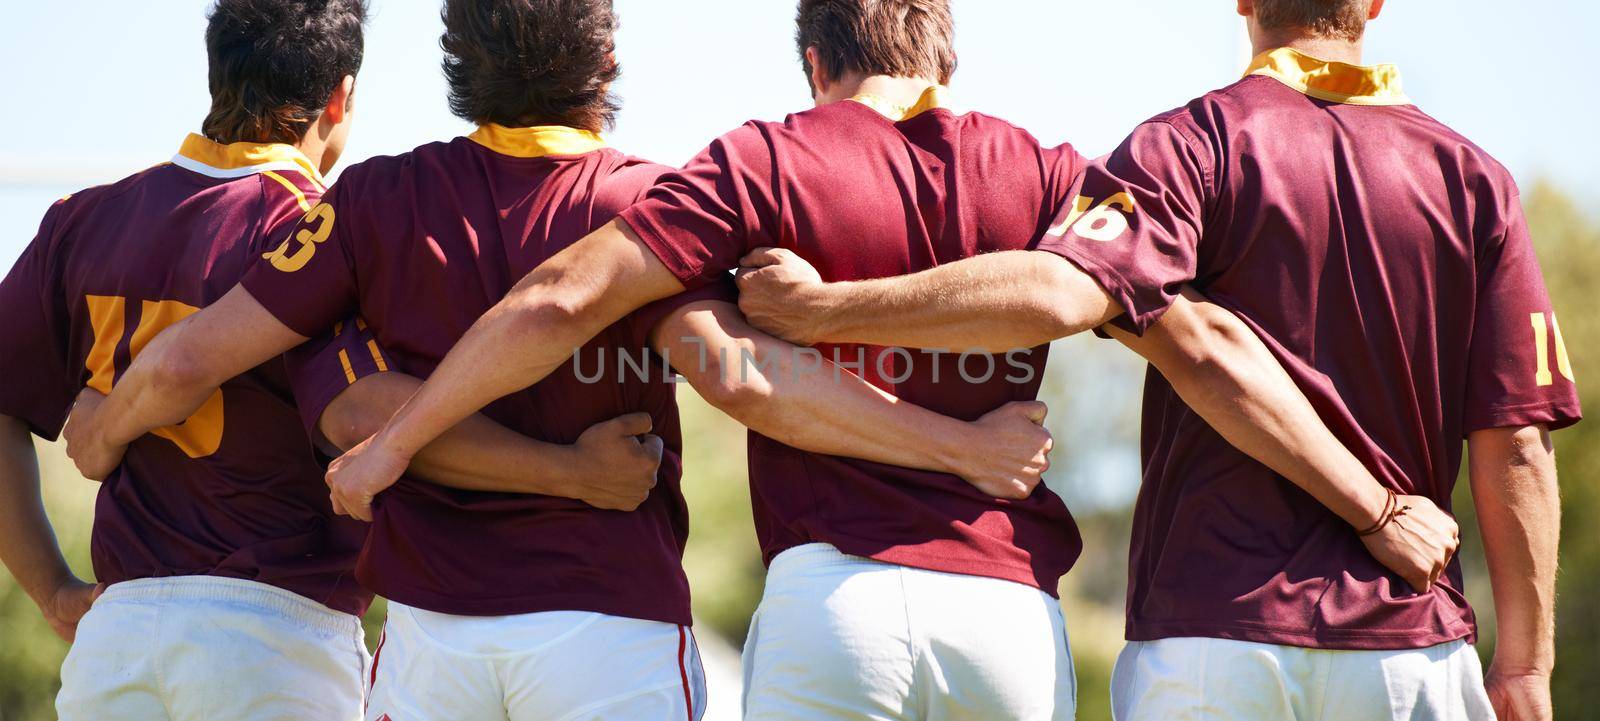 Rearview shot of a young rugby team lining up for a scrum.